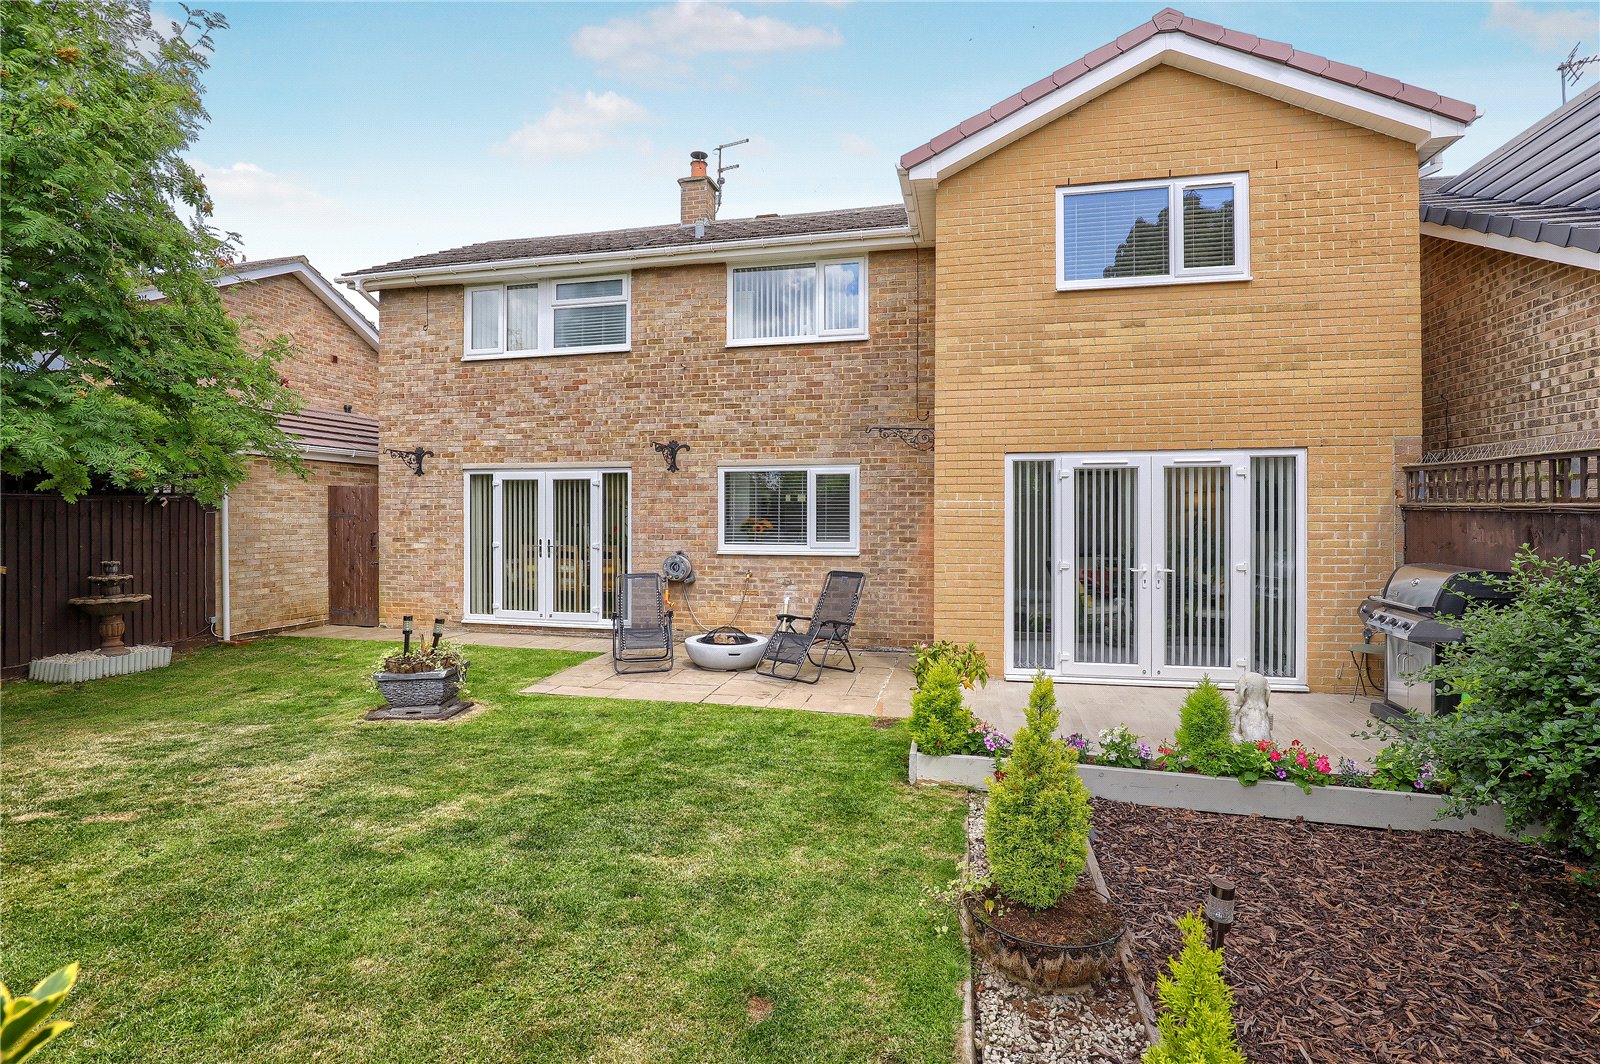 4 bed house for sale in Moor Park, Nunthorpe 2